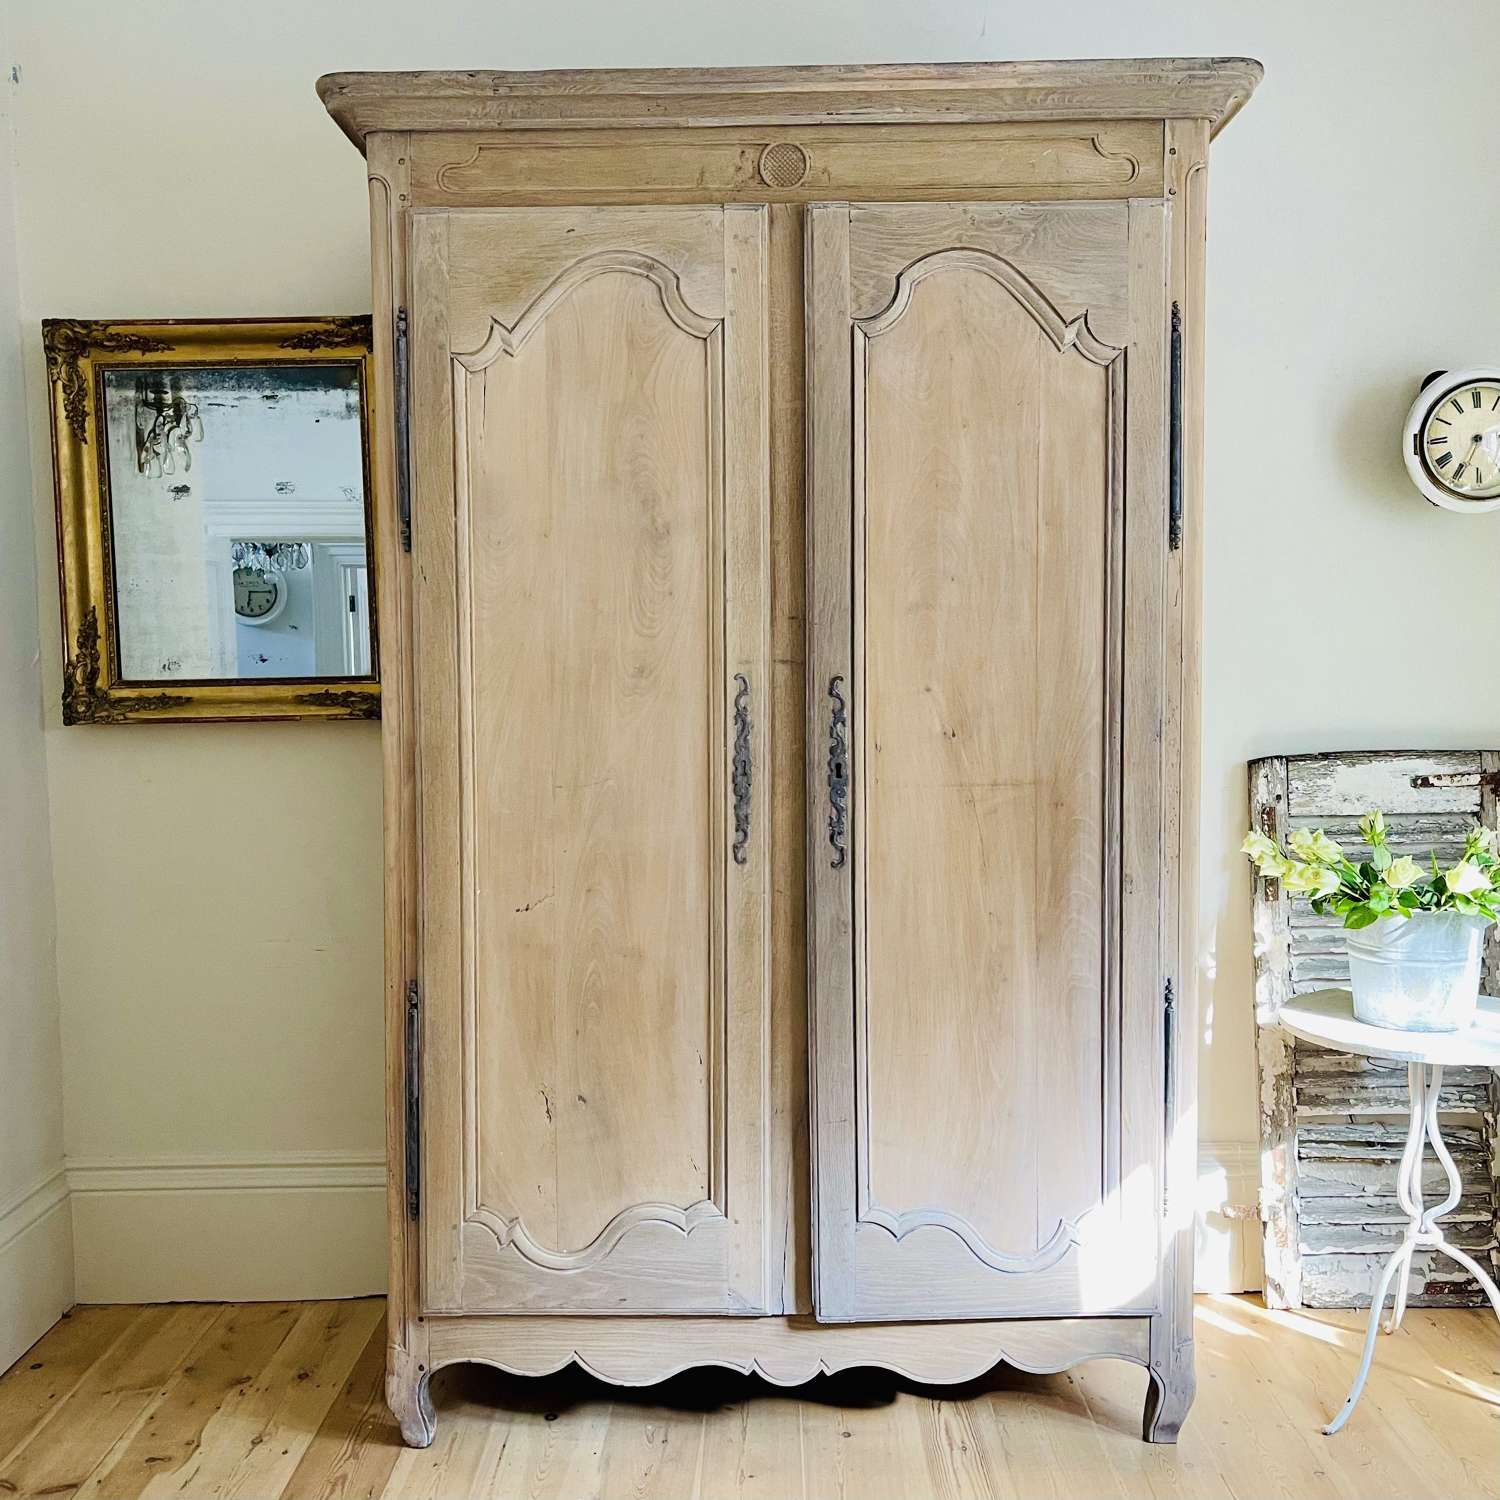 19th Century French Oak Armoire Wardrobe With Hanging Rail In French Armoires Wardrobes (View 9 of 15)